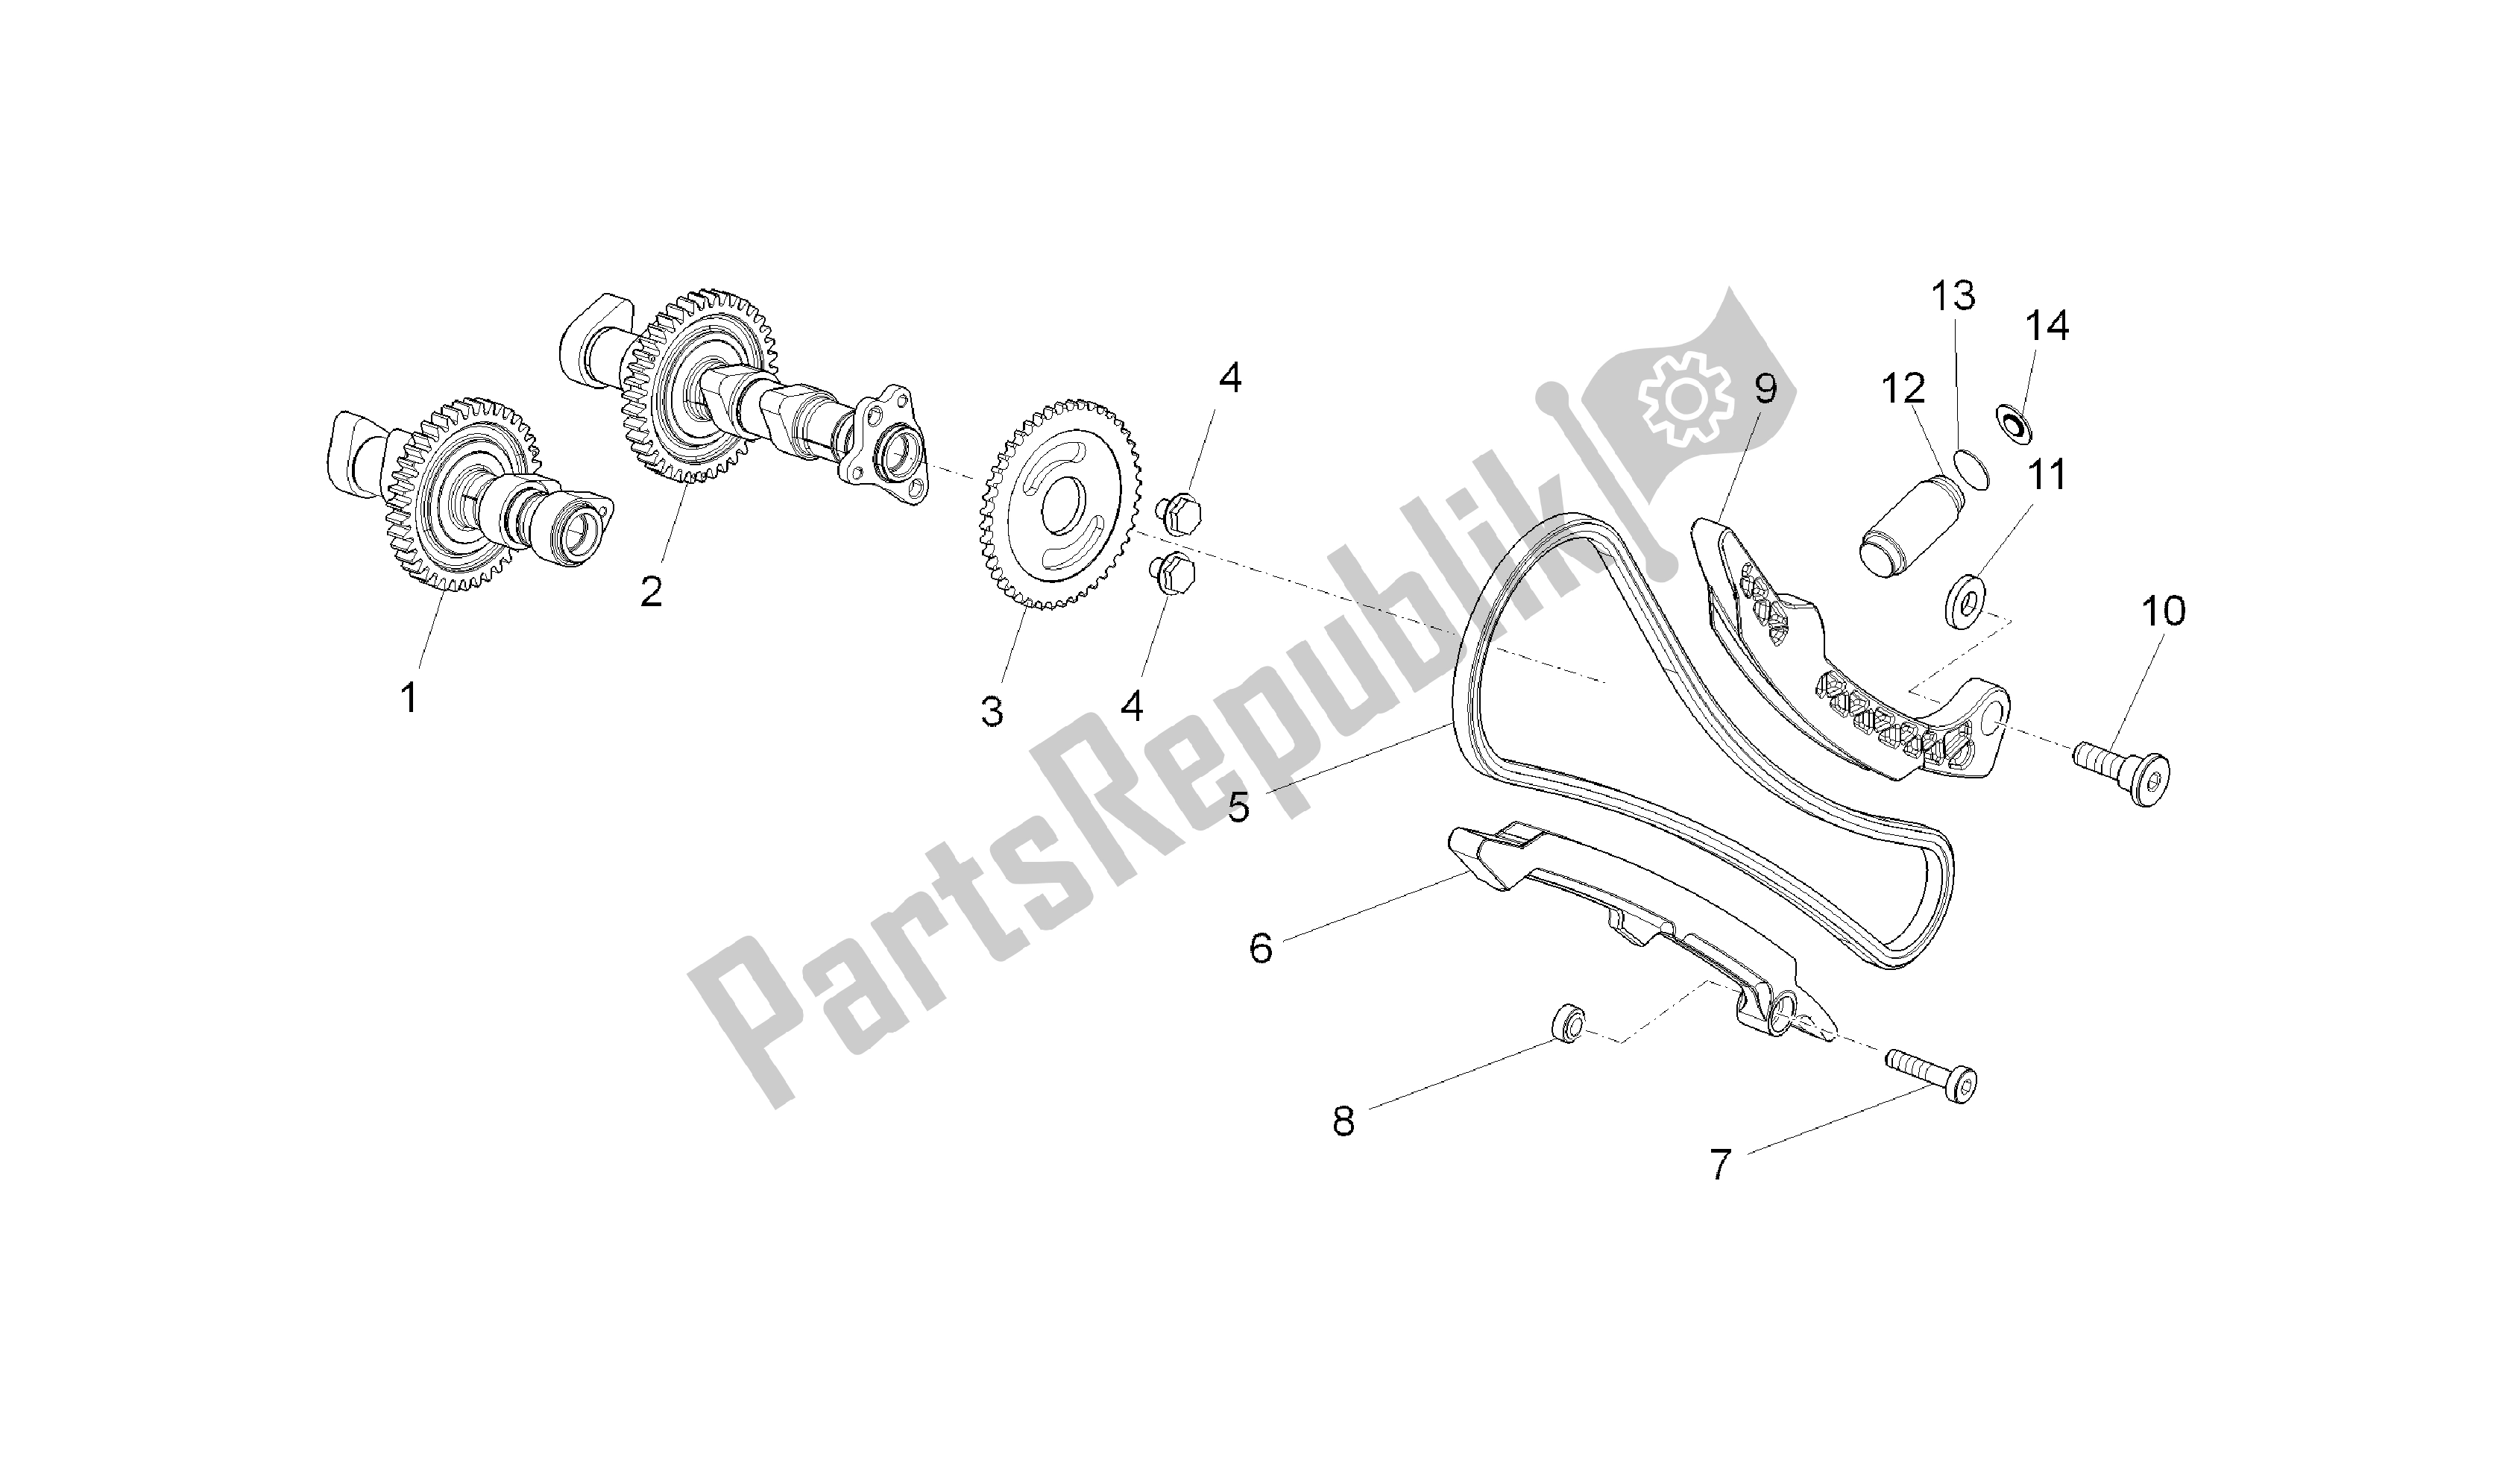 All parts for the Front Cylinder Timing System of the Aprilia RSV4 Aprc R 3982 1000 2011 - 2012